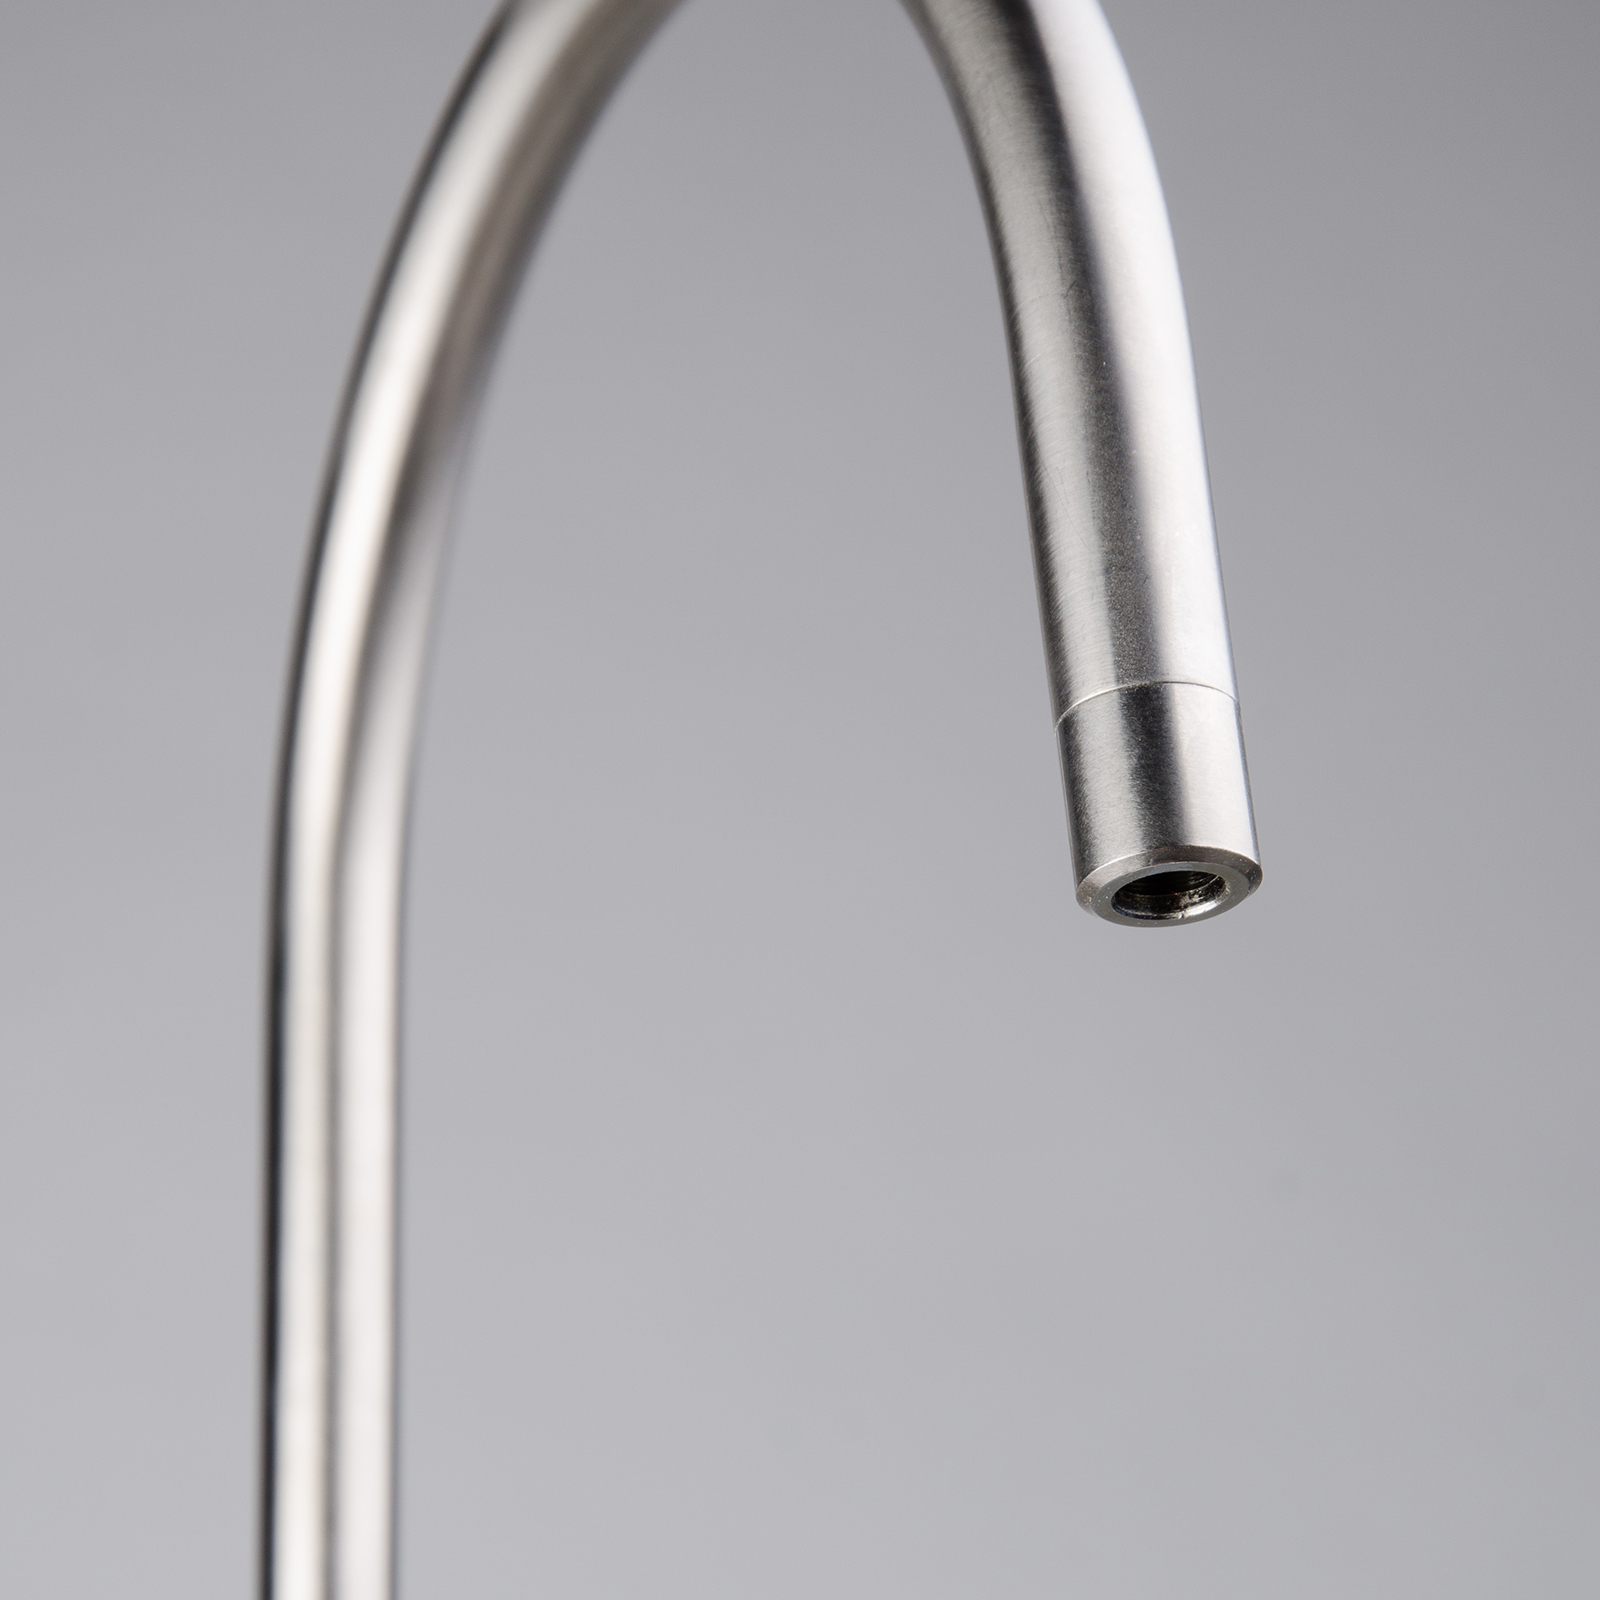 Lead free Stainless Steel RO faucet